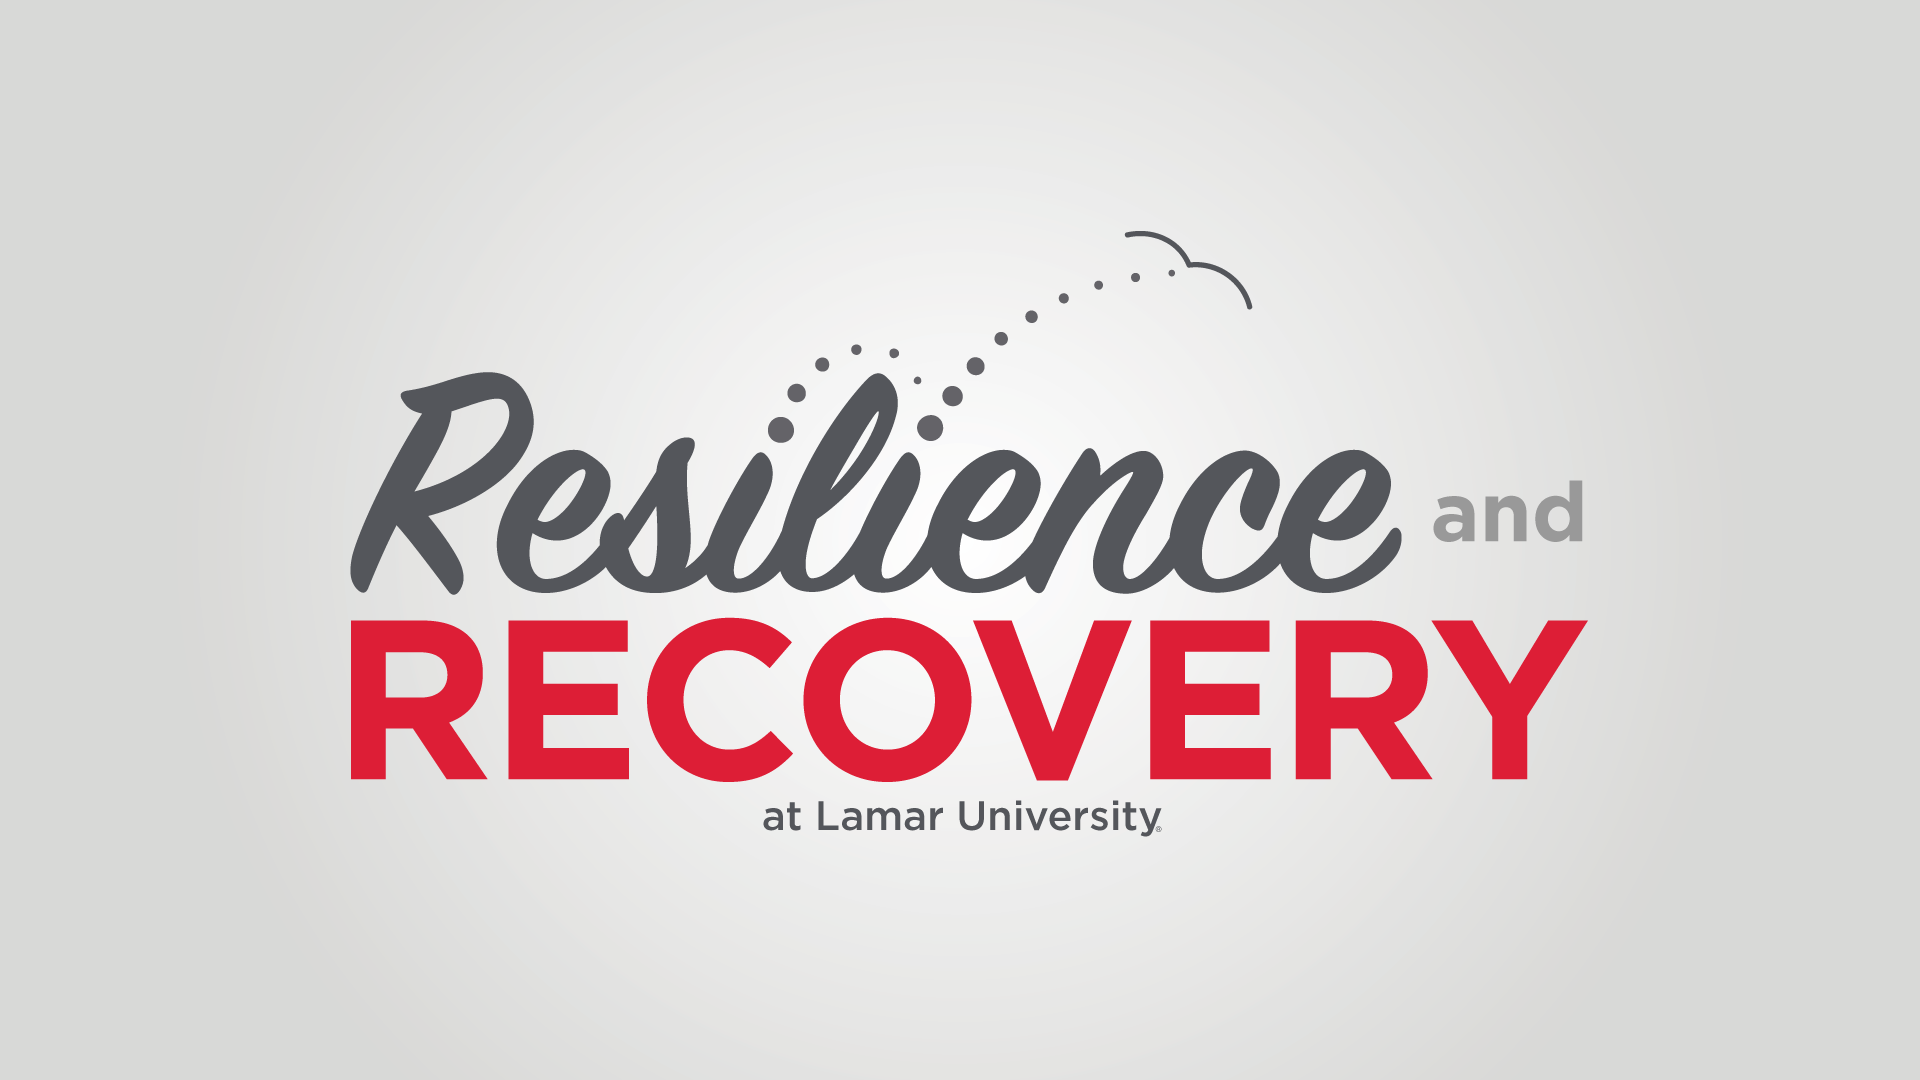 Resilience and Recovery at Lamar University